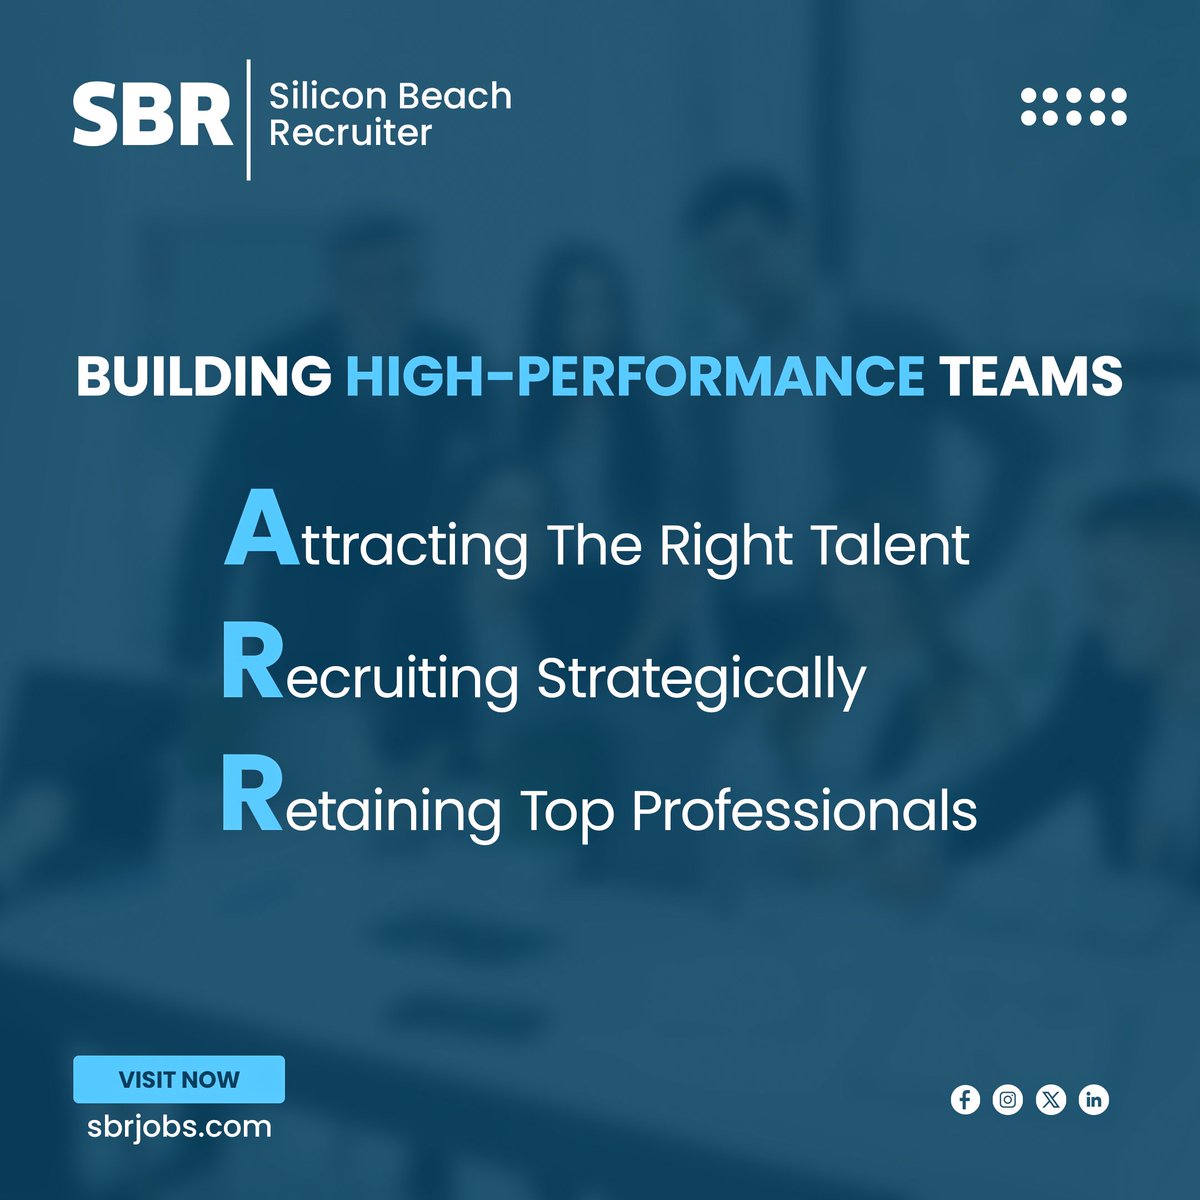 🌟 Our strategic approach ensures we attract the right talent tailored to your needs and recruit strategically to meet your goals.

Let's embark on a journey of success together! 🌐 

#Success2024 #HighPerformanceTeams #StrategicRecruitment #TopTalentRetention #SBRJobs